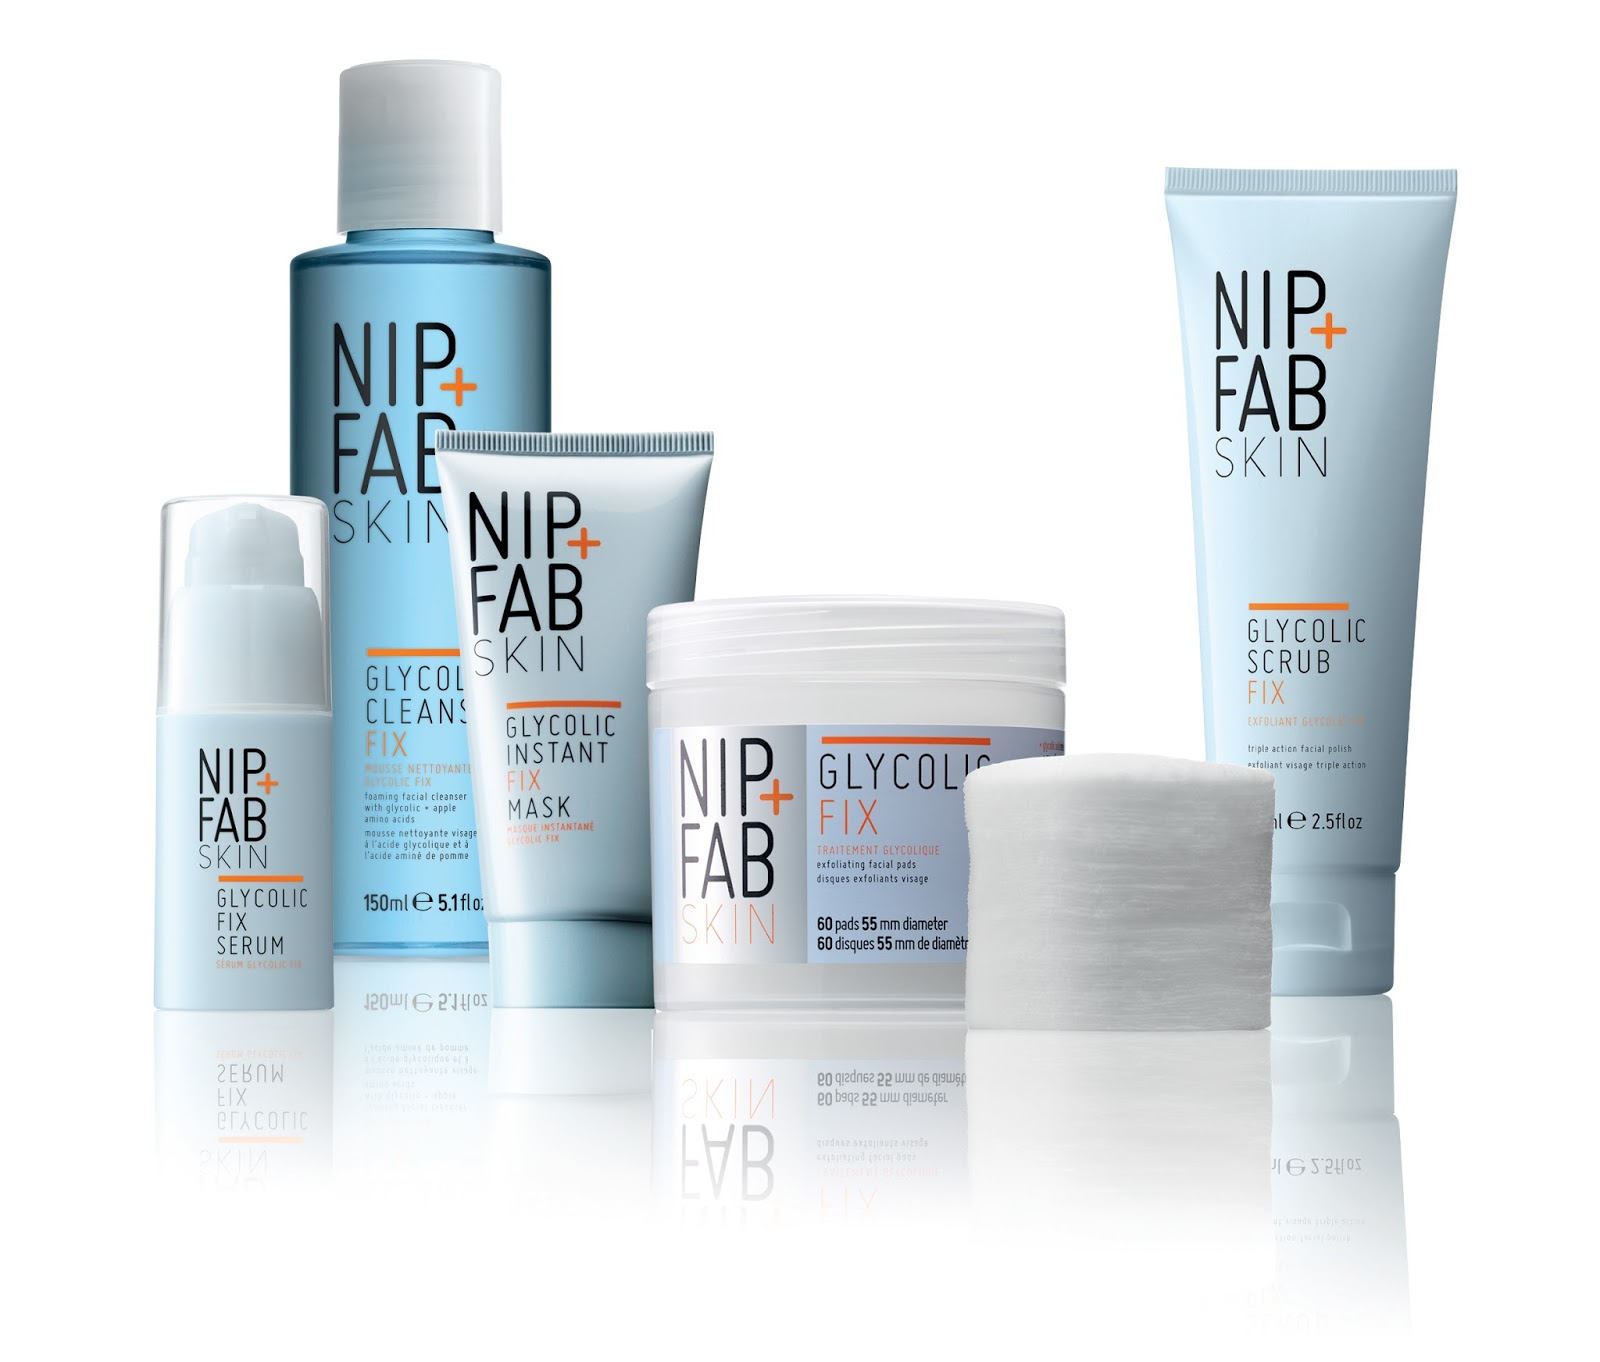 Reveal Brighter Skin with the Nip+Fab Glycolic Range.